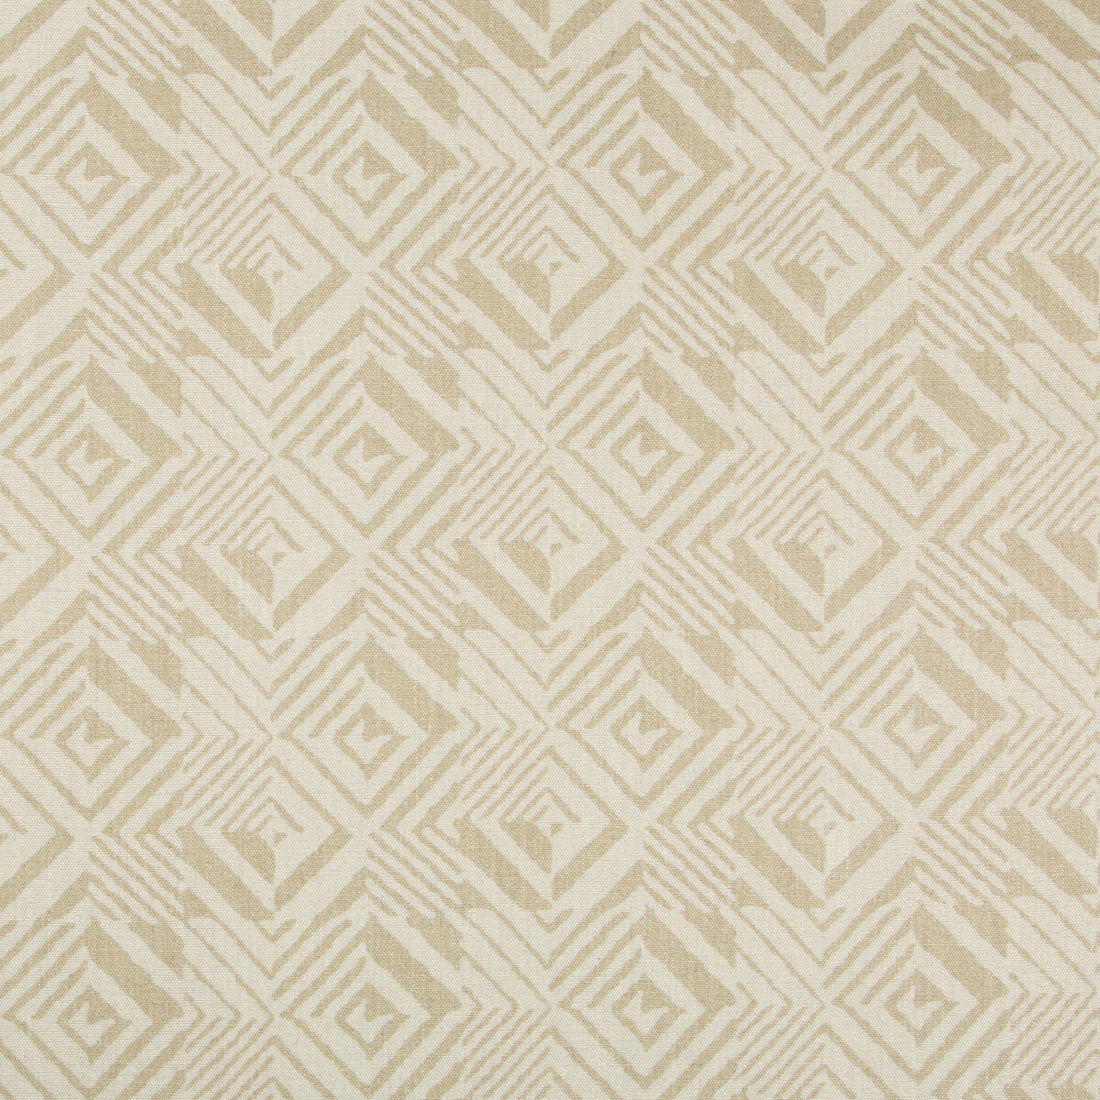 Doyen fabric in linen color - pattern DOYEN.16.0 - by Kravet Couture in the Sue Firestone Malibu collection